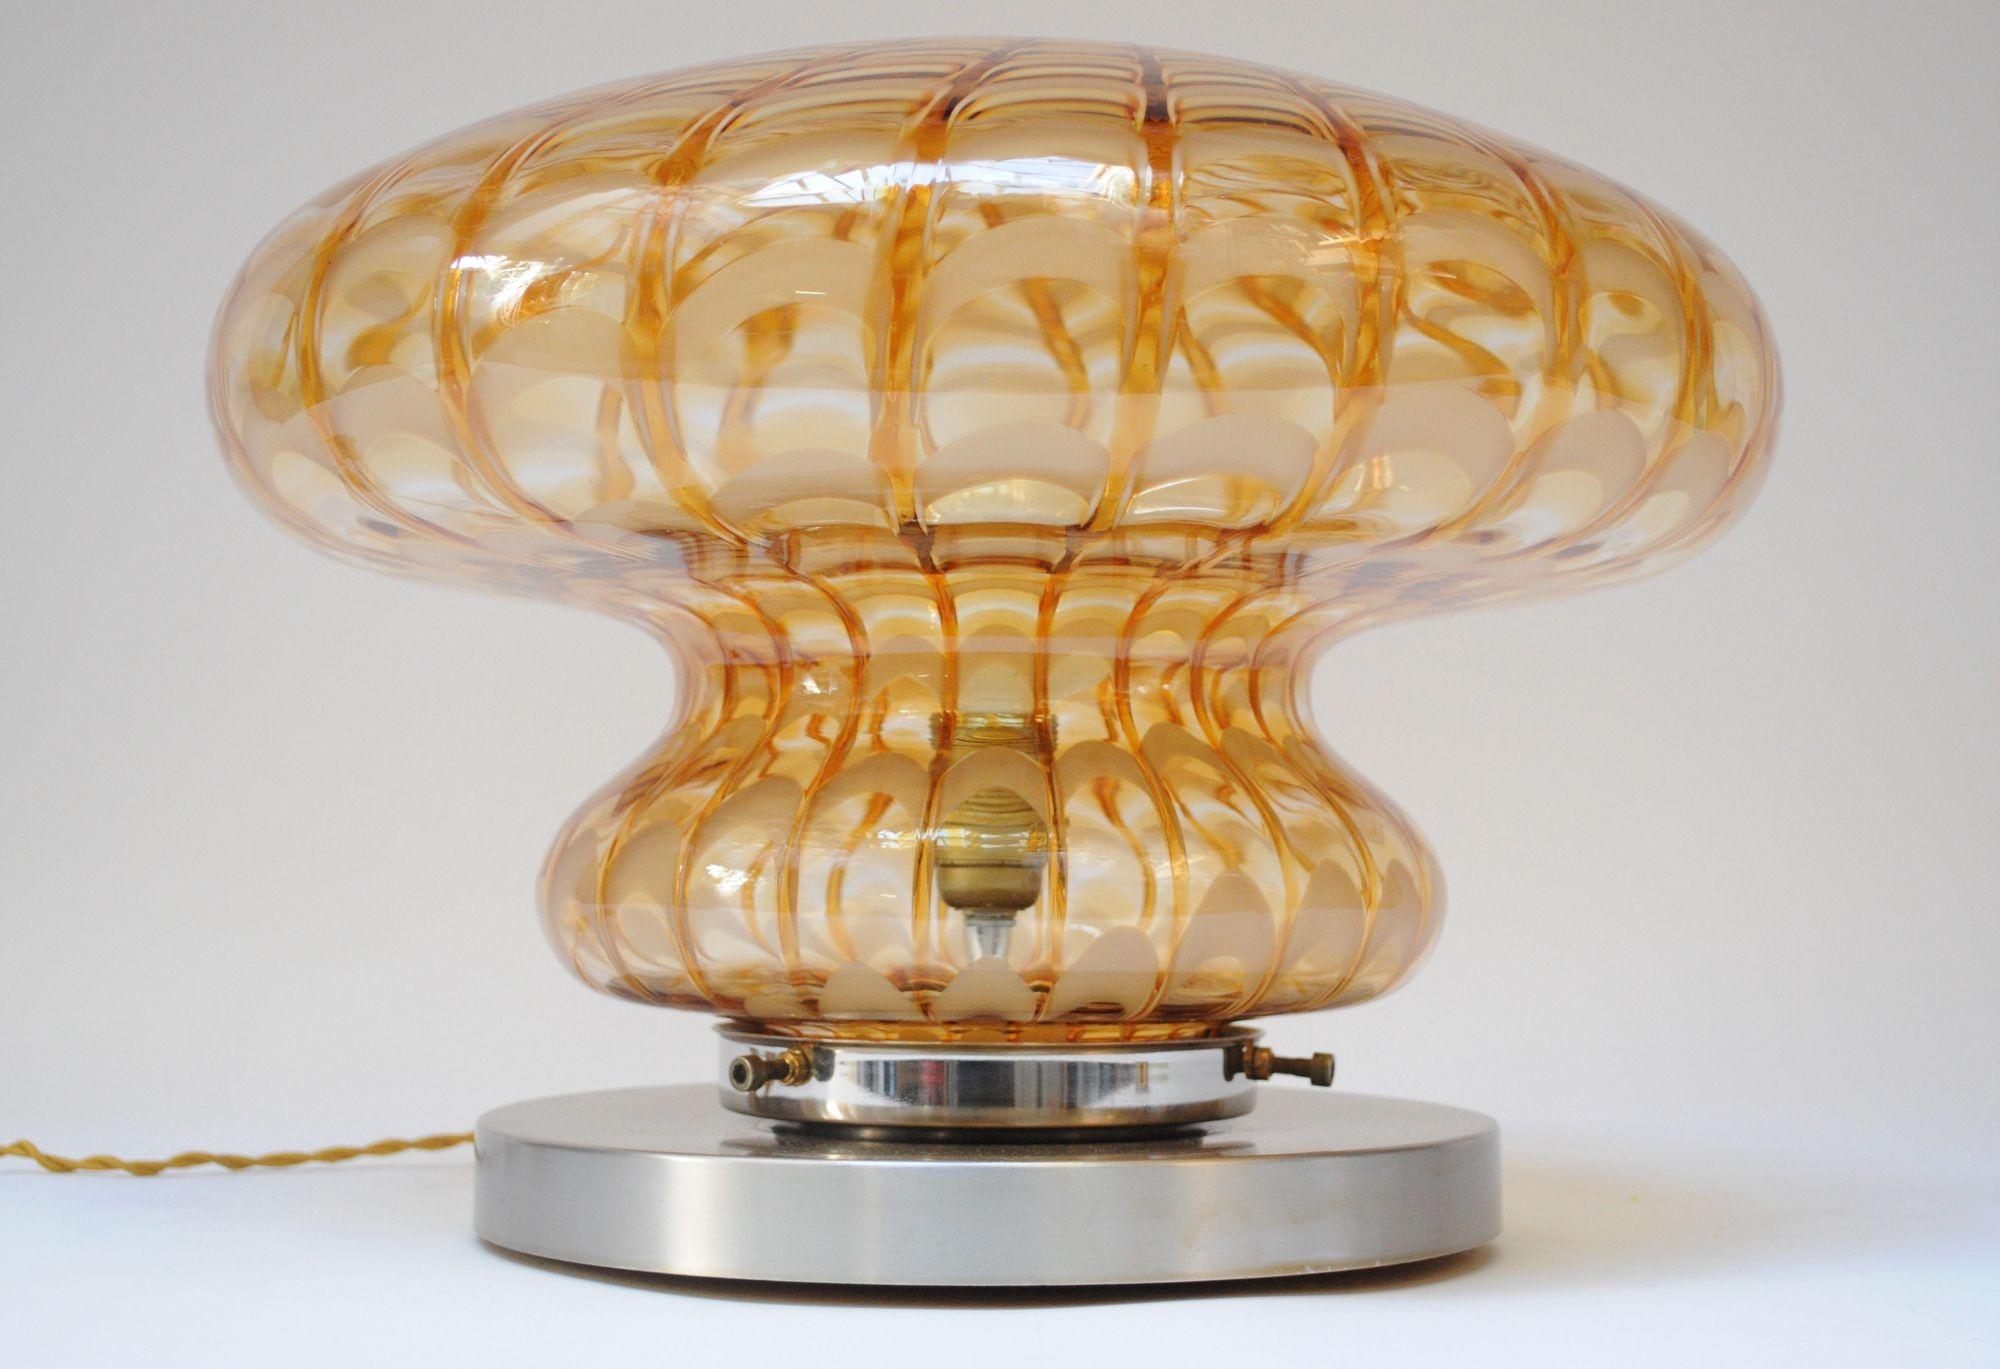 Murano glass mushroom-form table lamp supported by a circular aluminum base (ca. 1970s, Italy).
Attractive pattern in amber and honey tones.
Excellent, vintage condition with light wear to the base (light spots, scuffs and a patch of